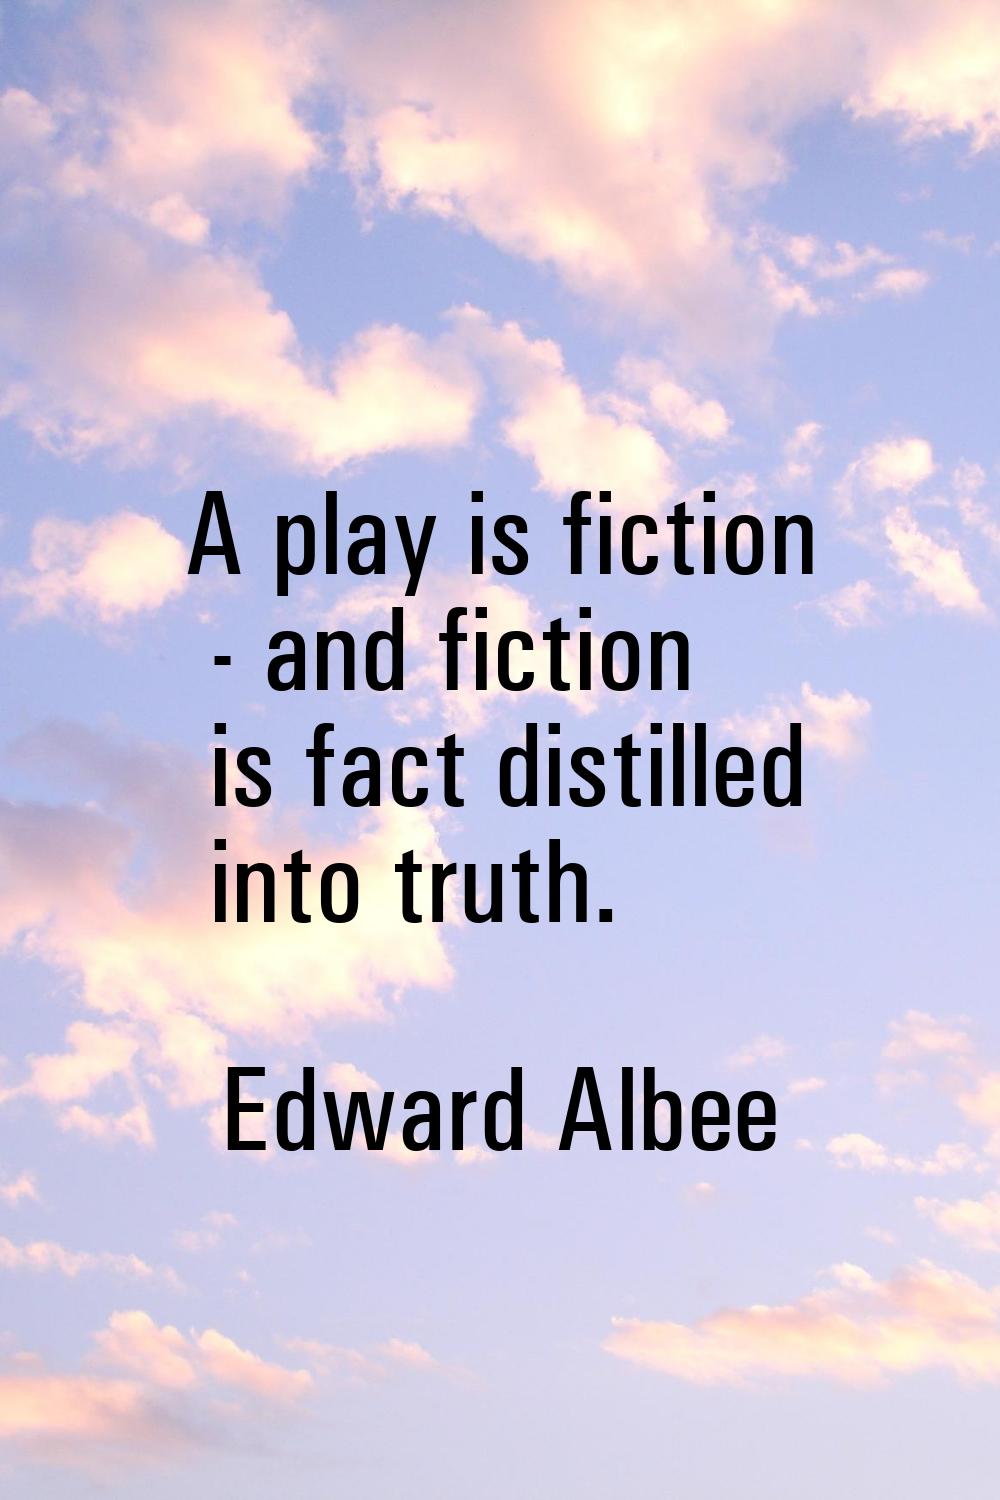 A play is fiction - and fiction is fact distilled into truth.